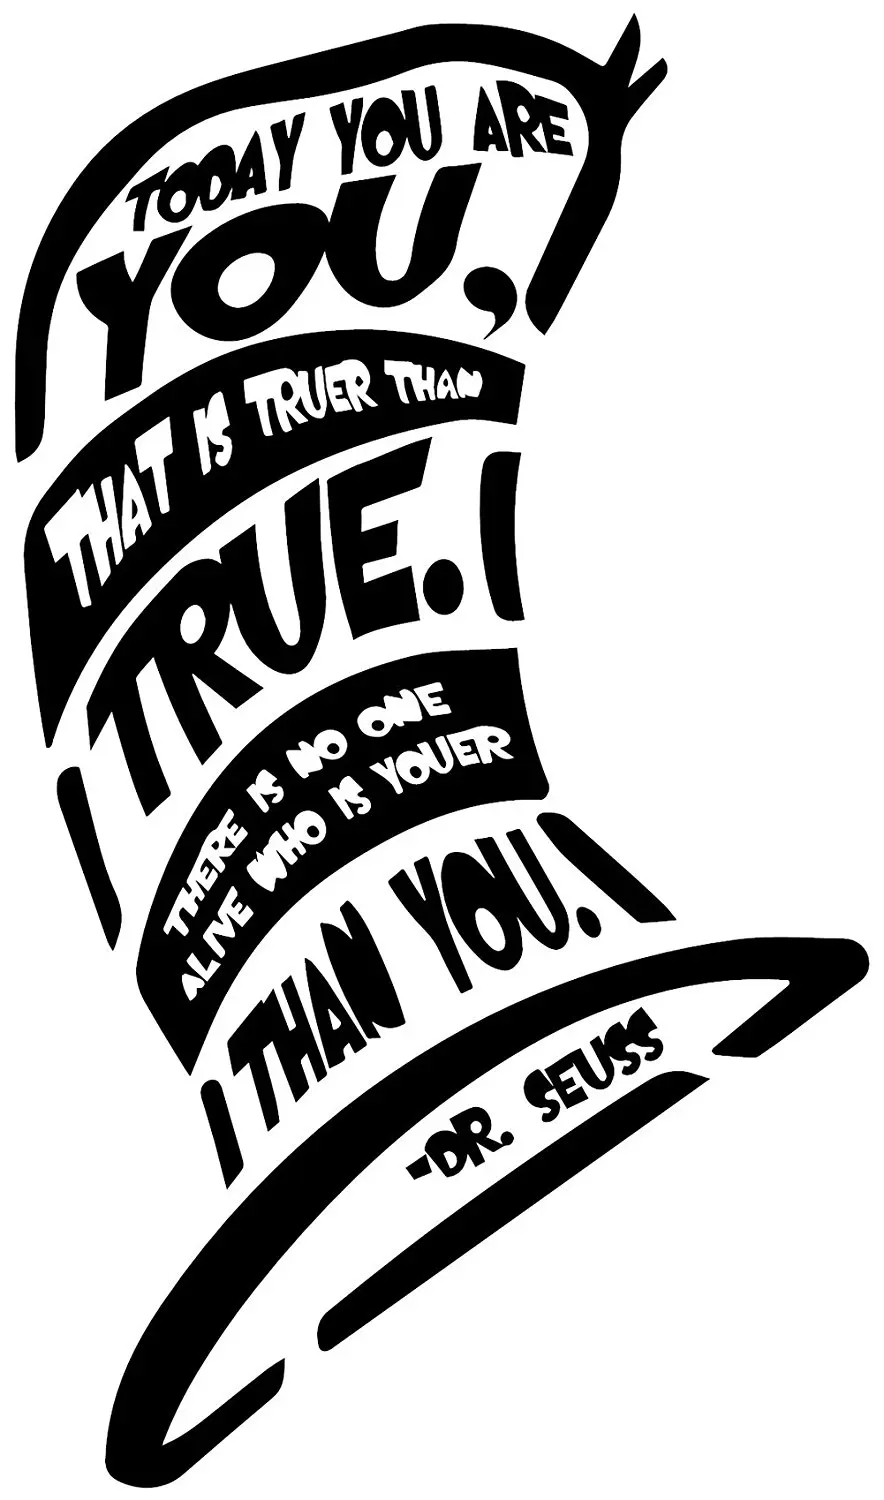 Buy Dr Seuss Wall Decals are a Vinyl Decal. Displaying - Today you are ...